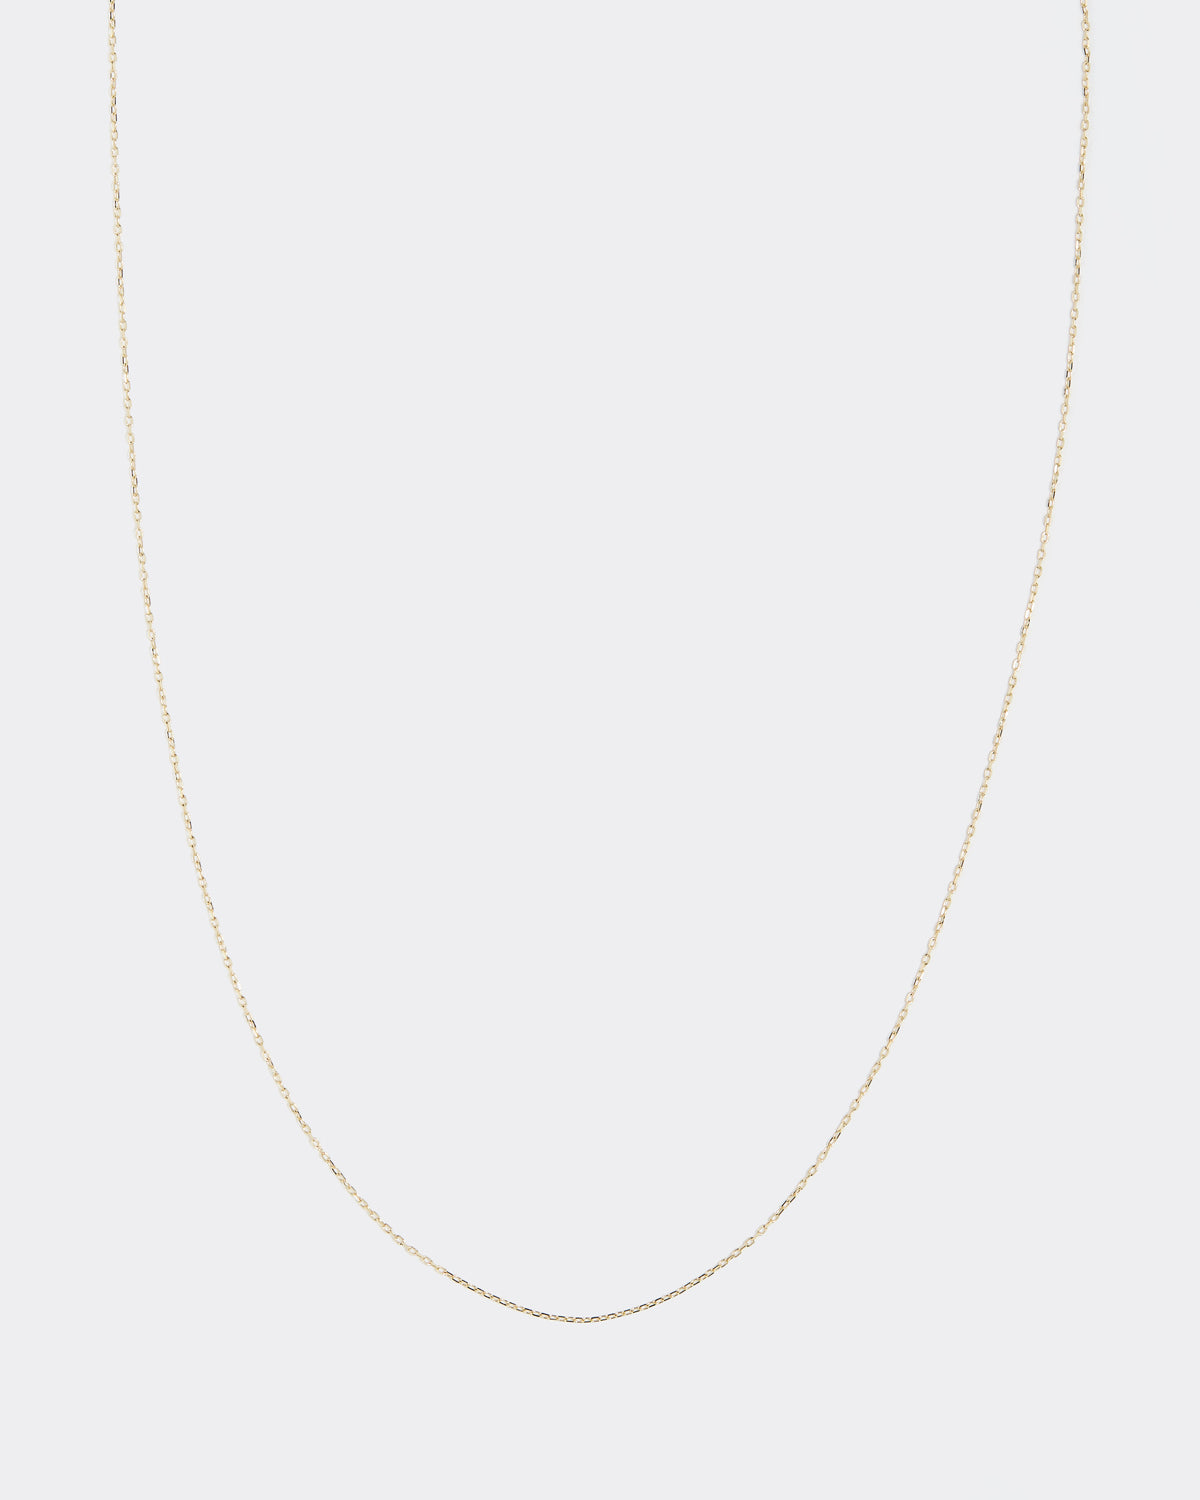 Solid Gold Charm Chain Necklace